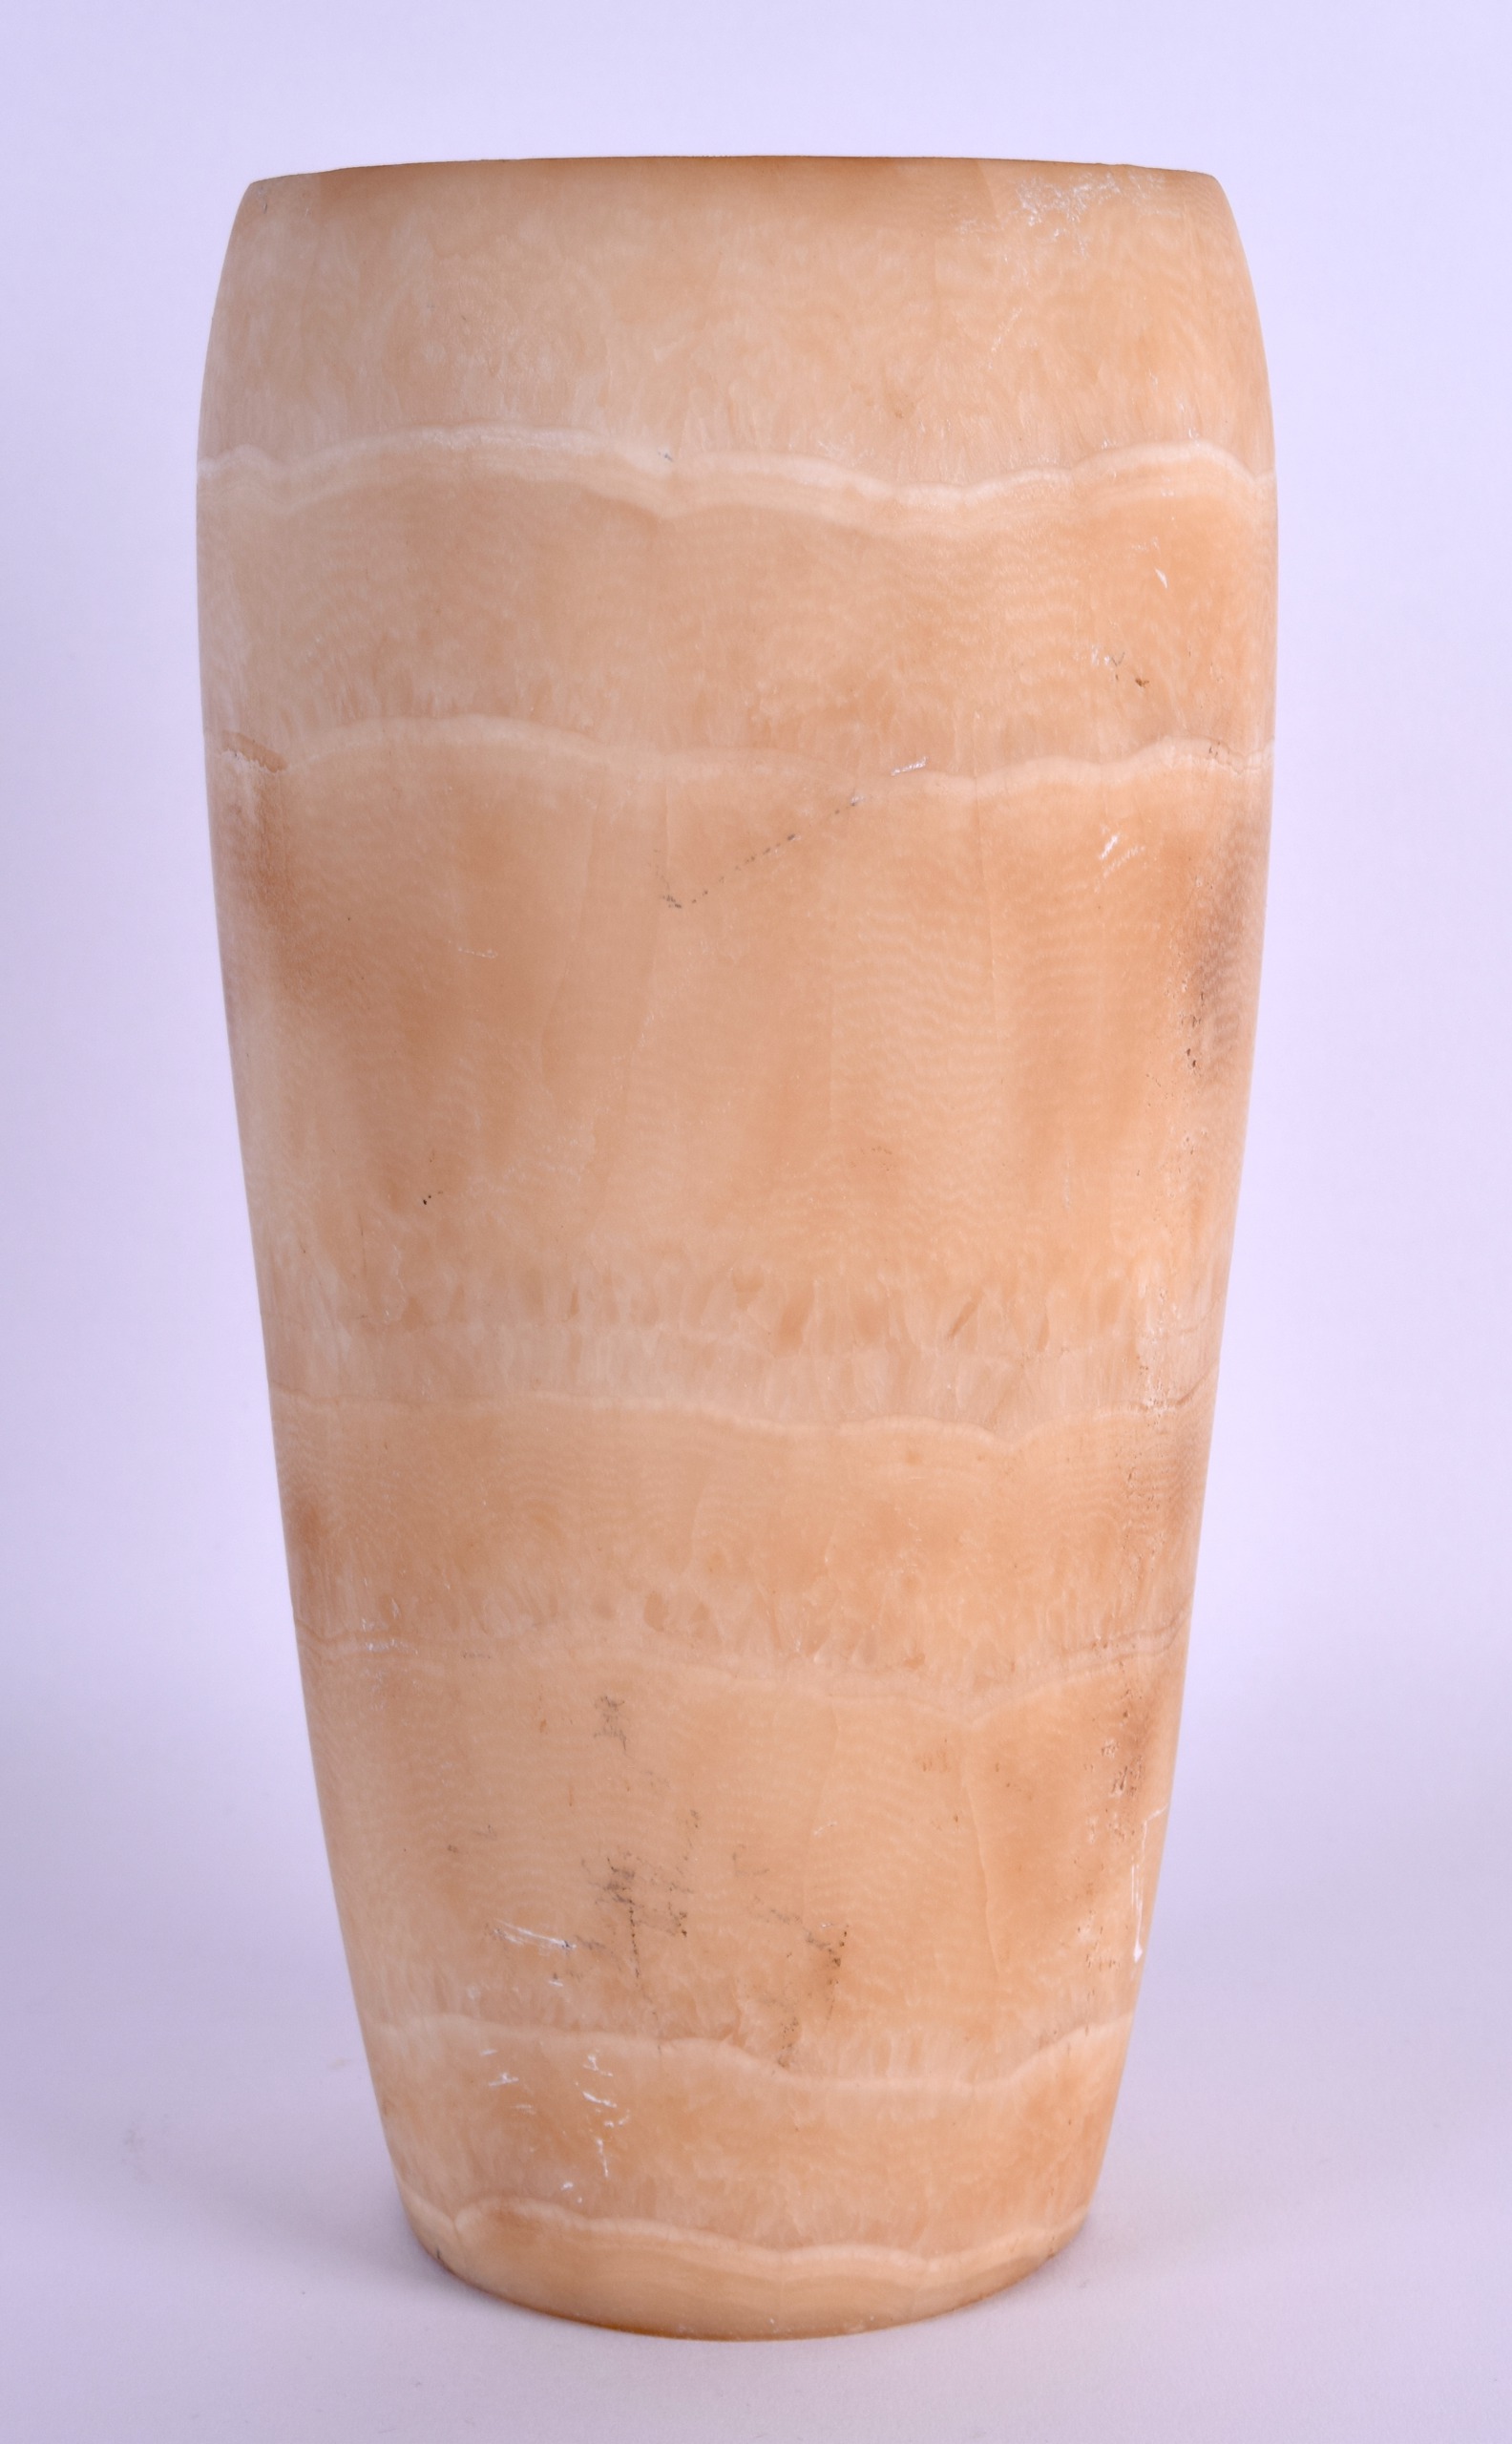 AN EGYPTIAN CARVED ALABASTER CANOPIC CARVED JAR incised with hieroglyphics. 24 cm high. - Image 2 of 3